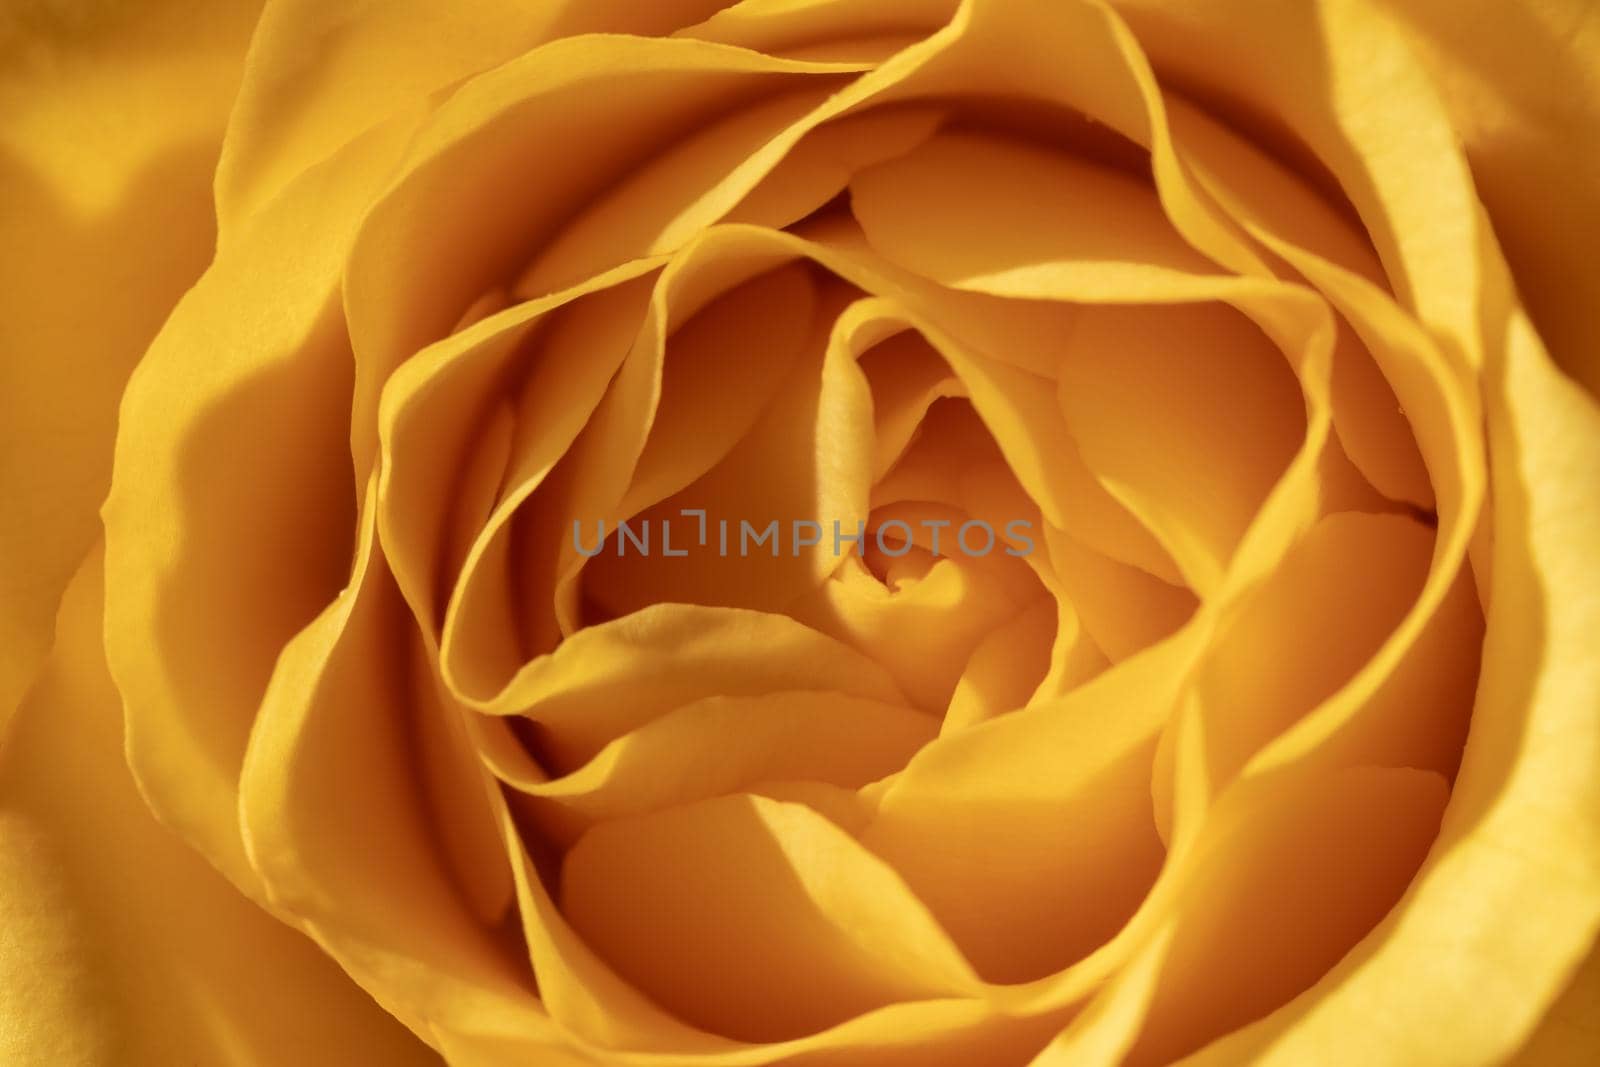 A yellow rose close-up. Petals close-up. Bright yellow background. In full frame